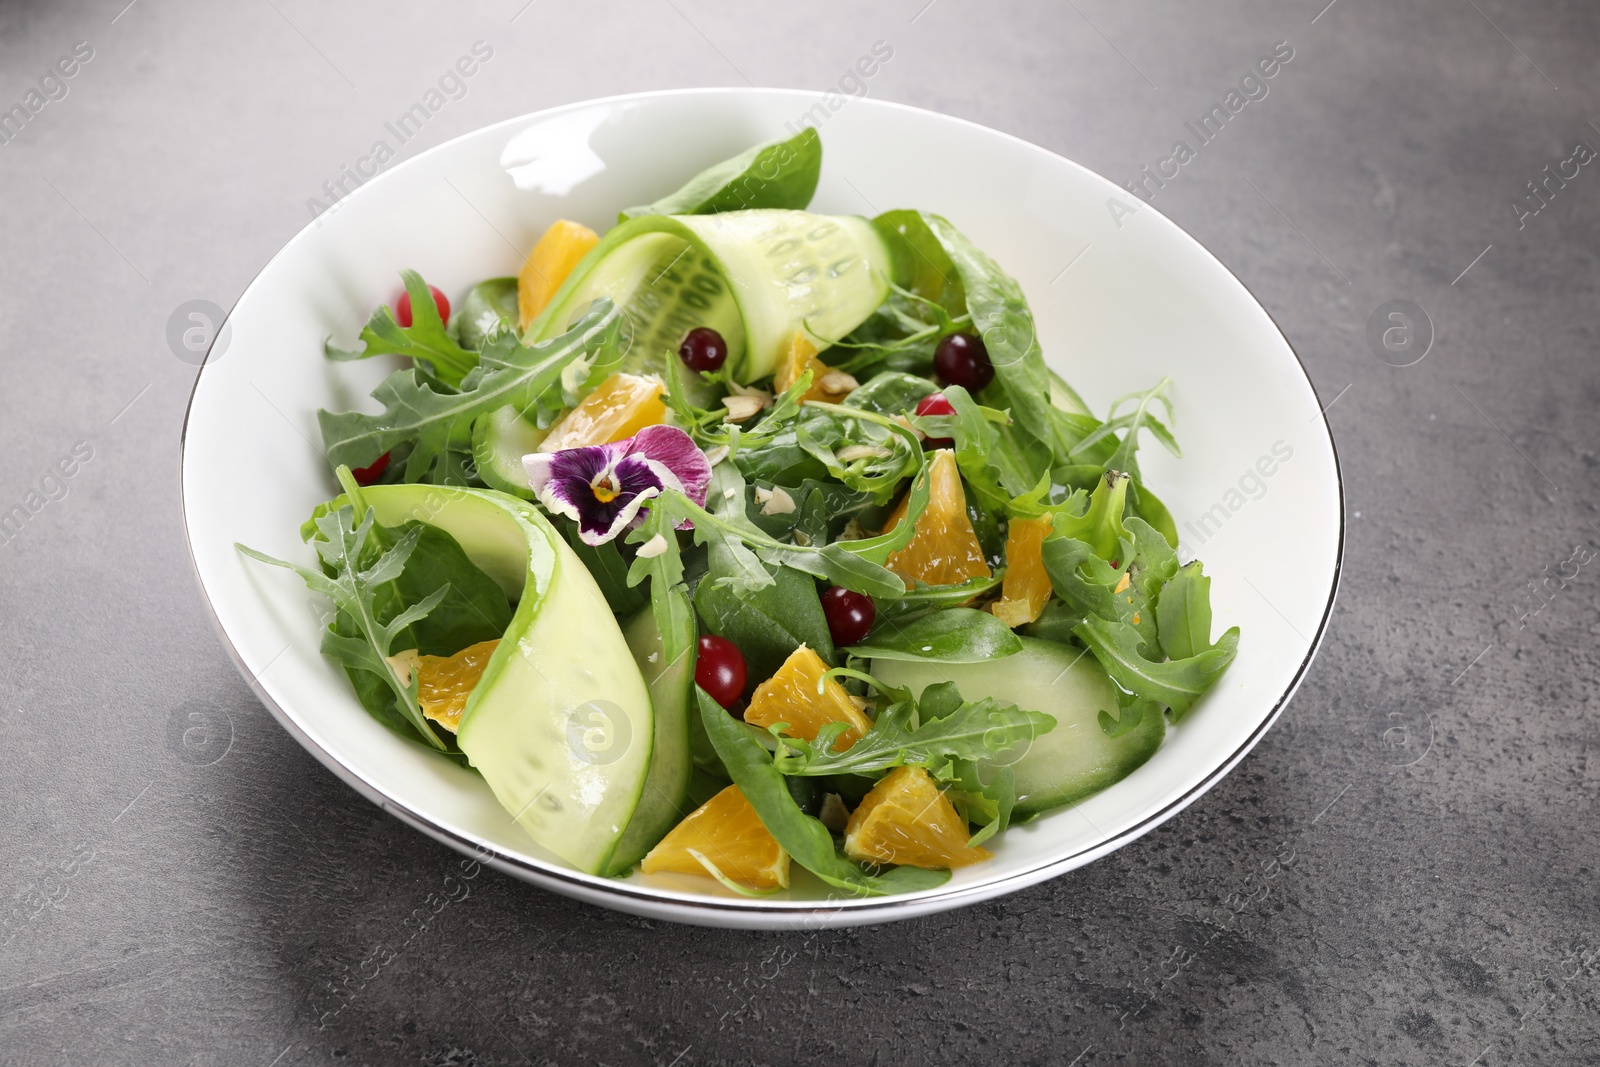 Photo of Delicious salad with cucumber and orange slices on gray table